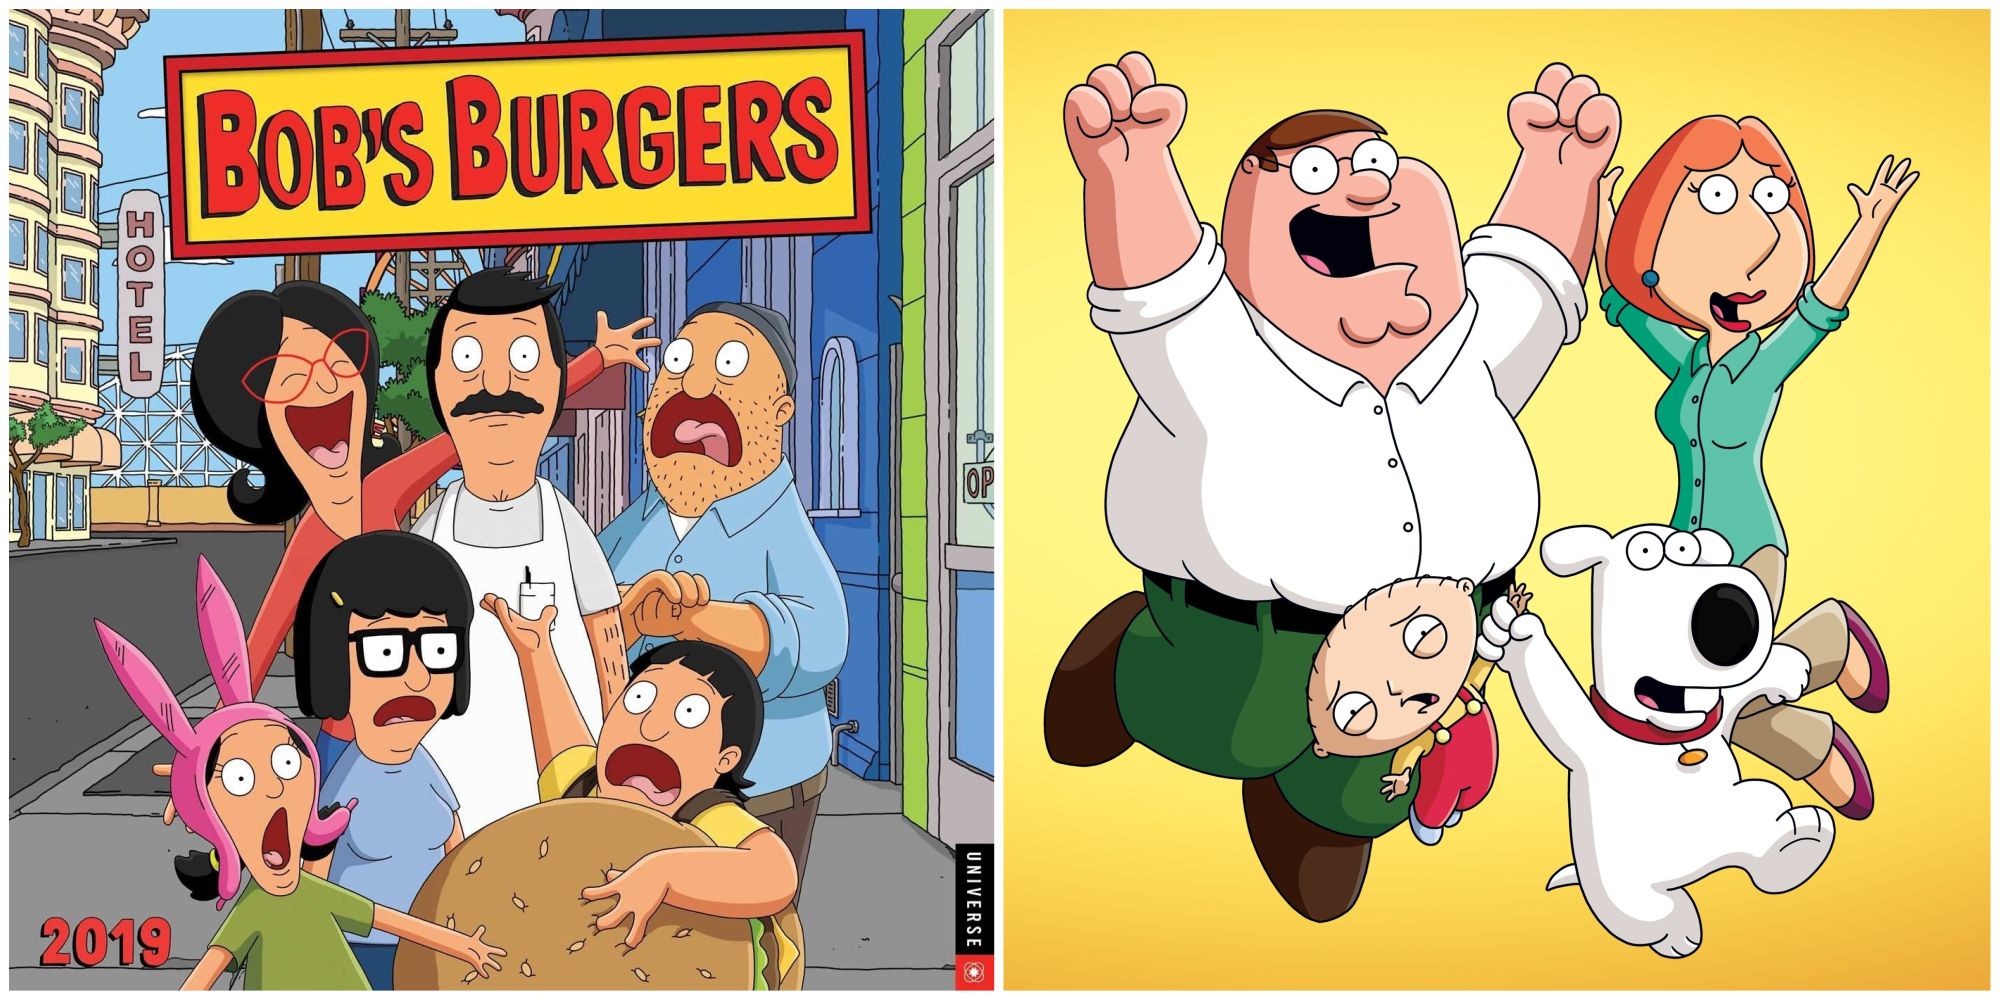 Bobs Burgers and Family Guy